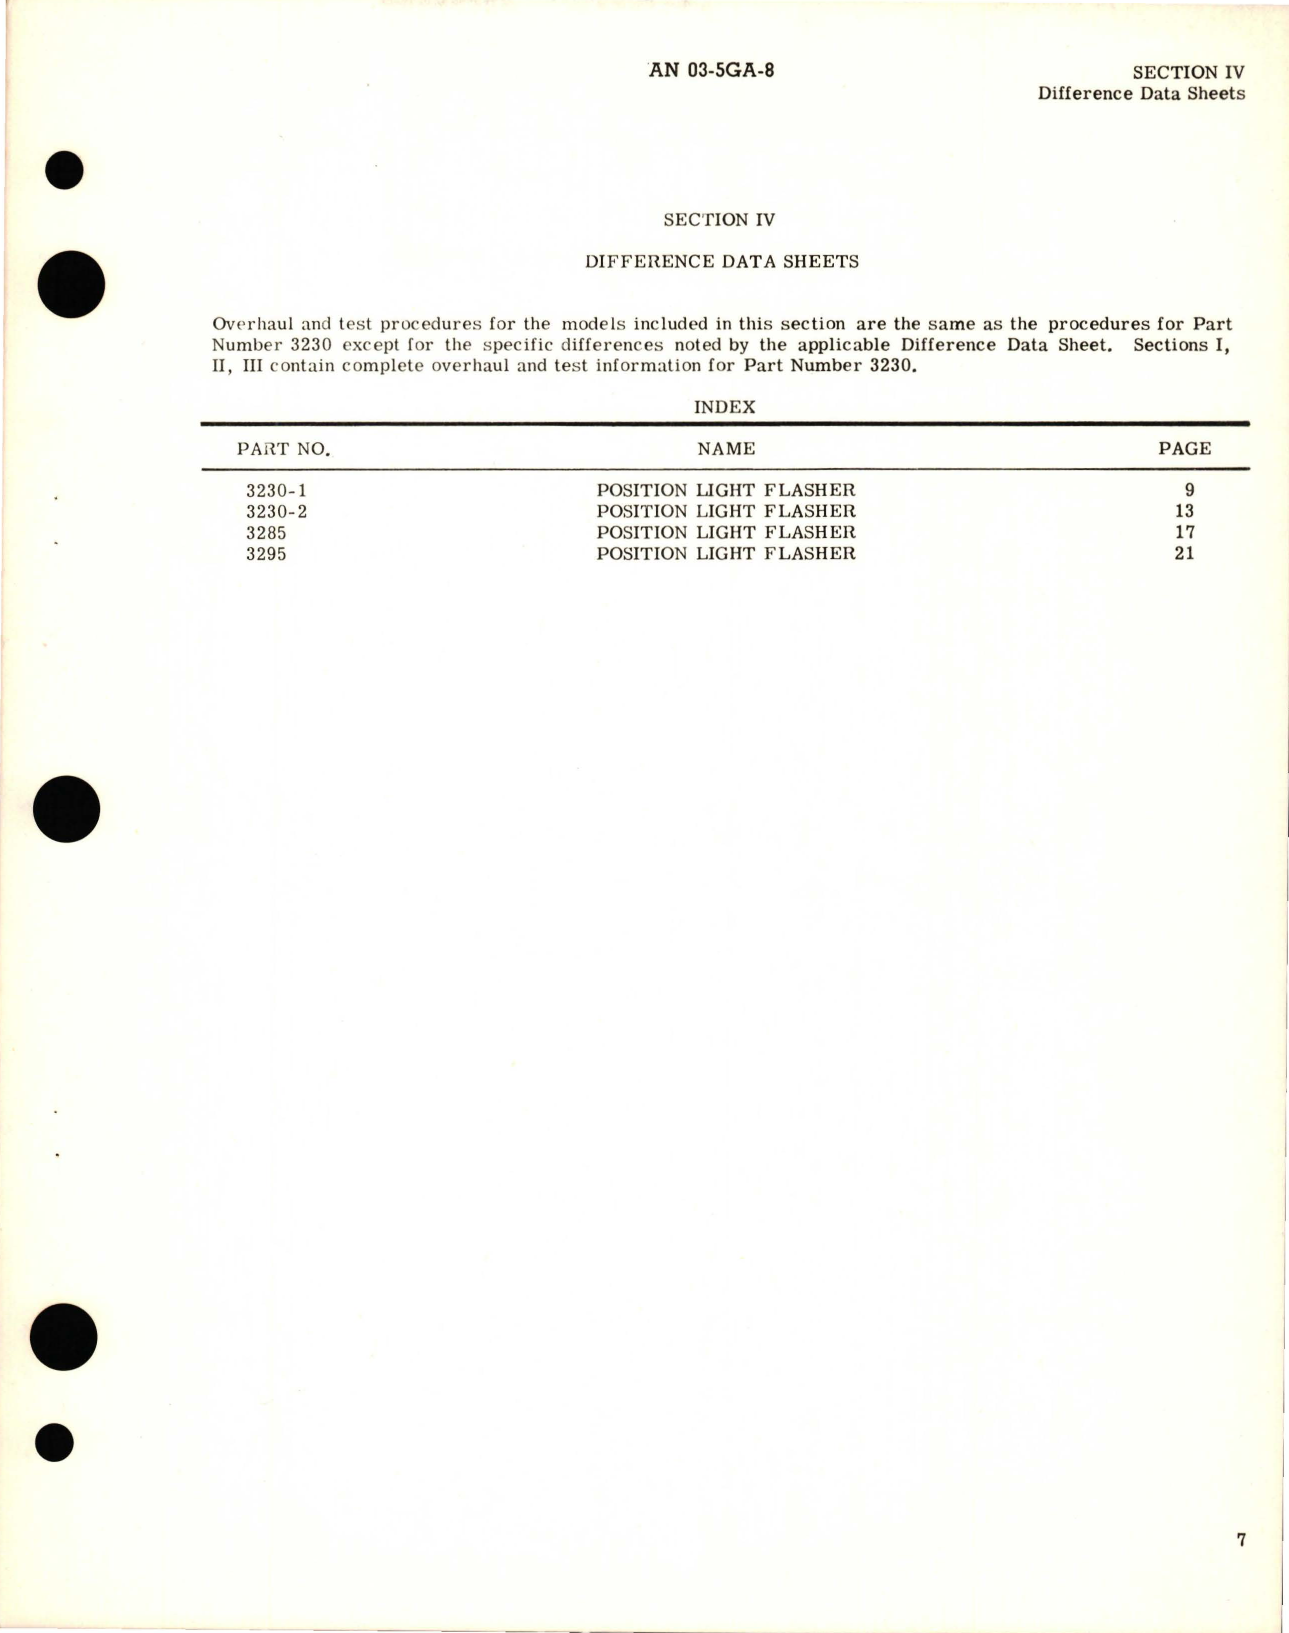 Sample page 9 from AirCorps Library document: Overhaul Instructions for Position Light Flasher - Type C-2, Parts 3230, 3230-1, 3230-2, 3285, and 3295